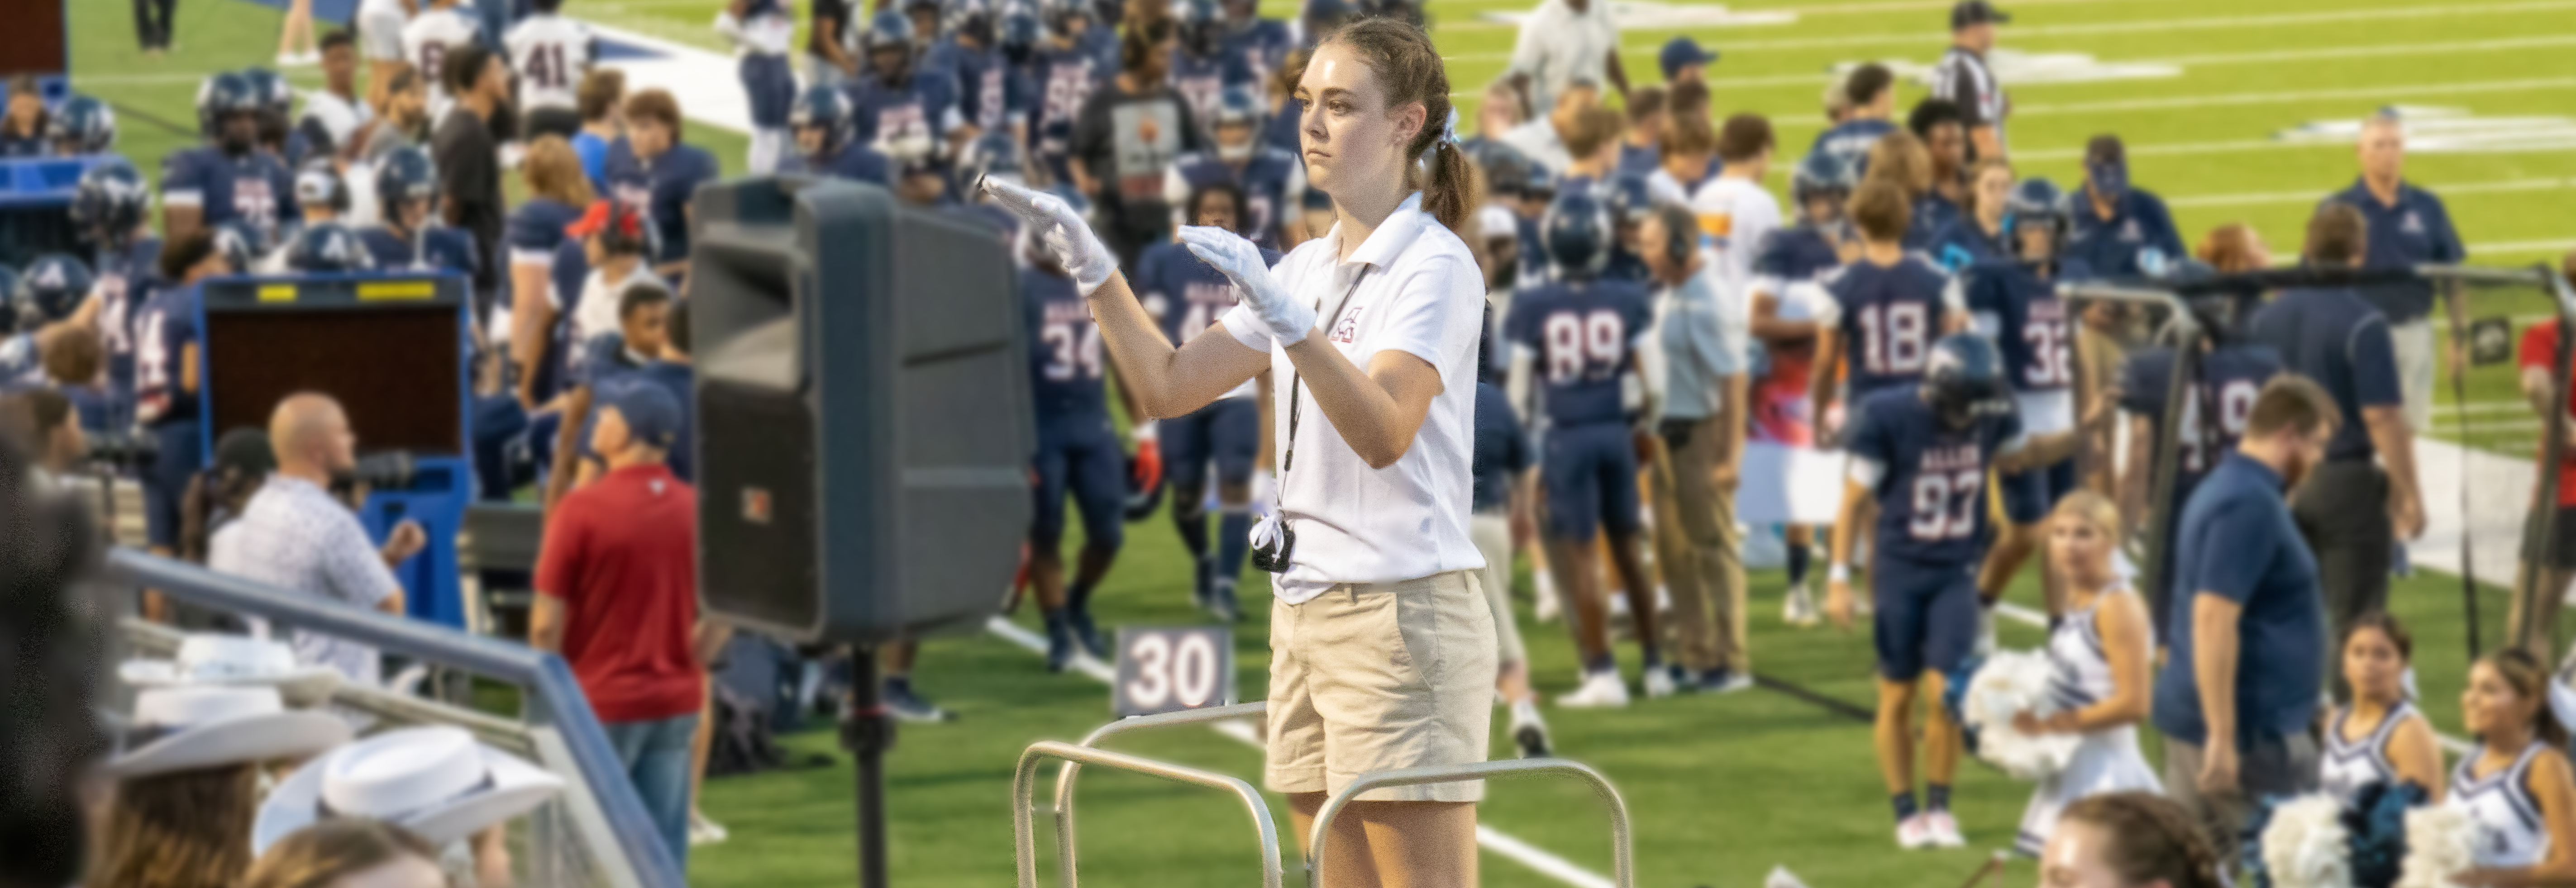 Drum Major leads band at DeSoto game